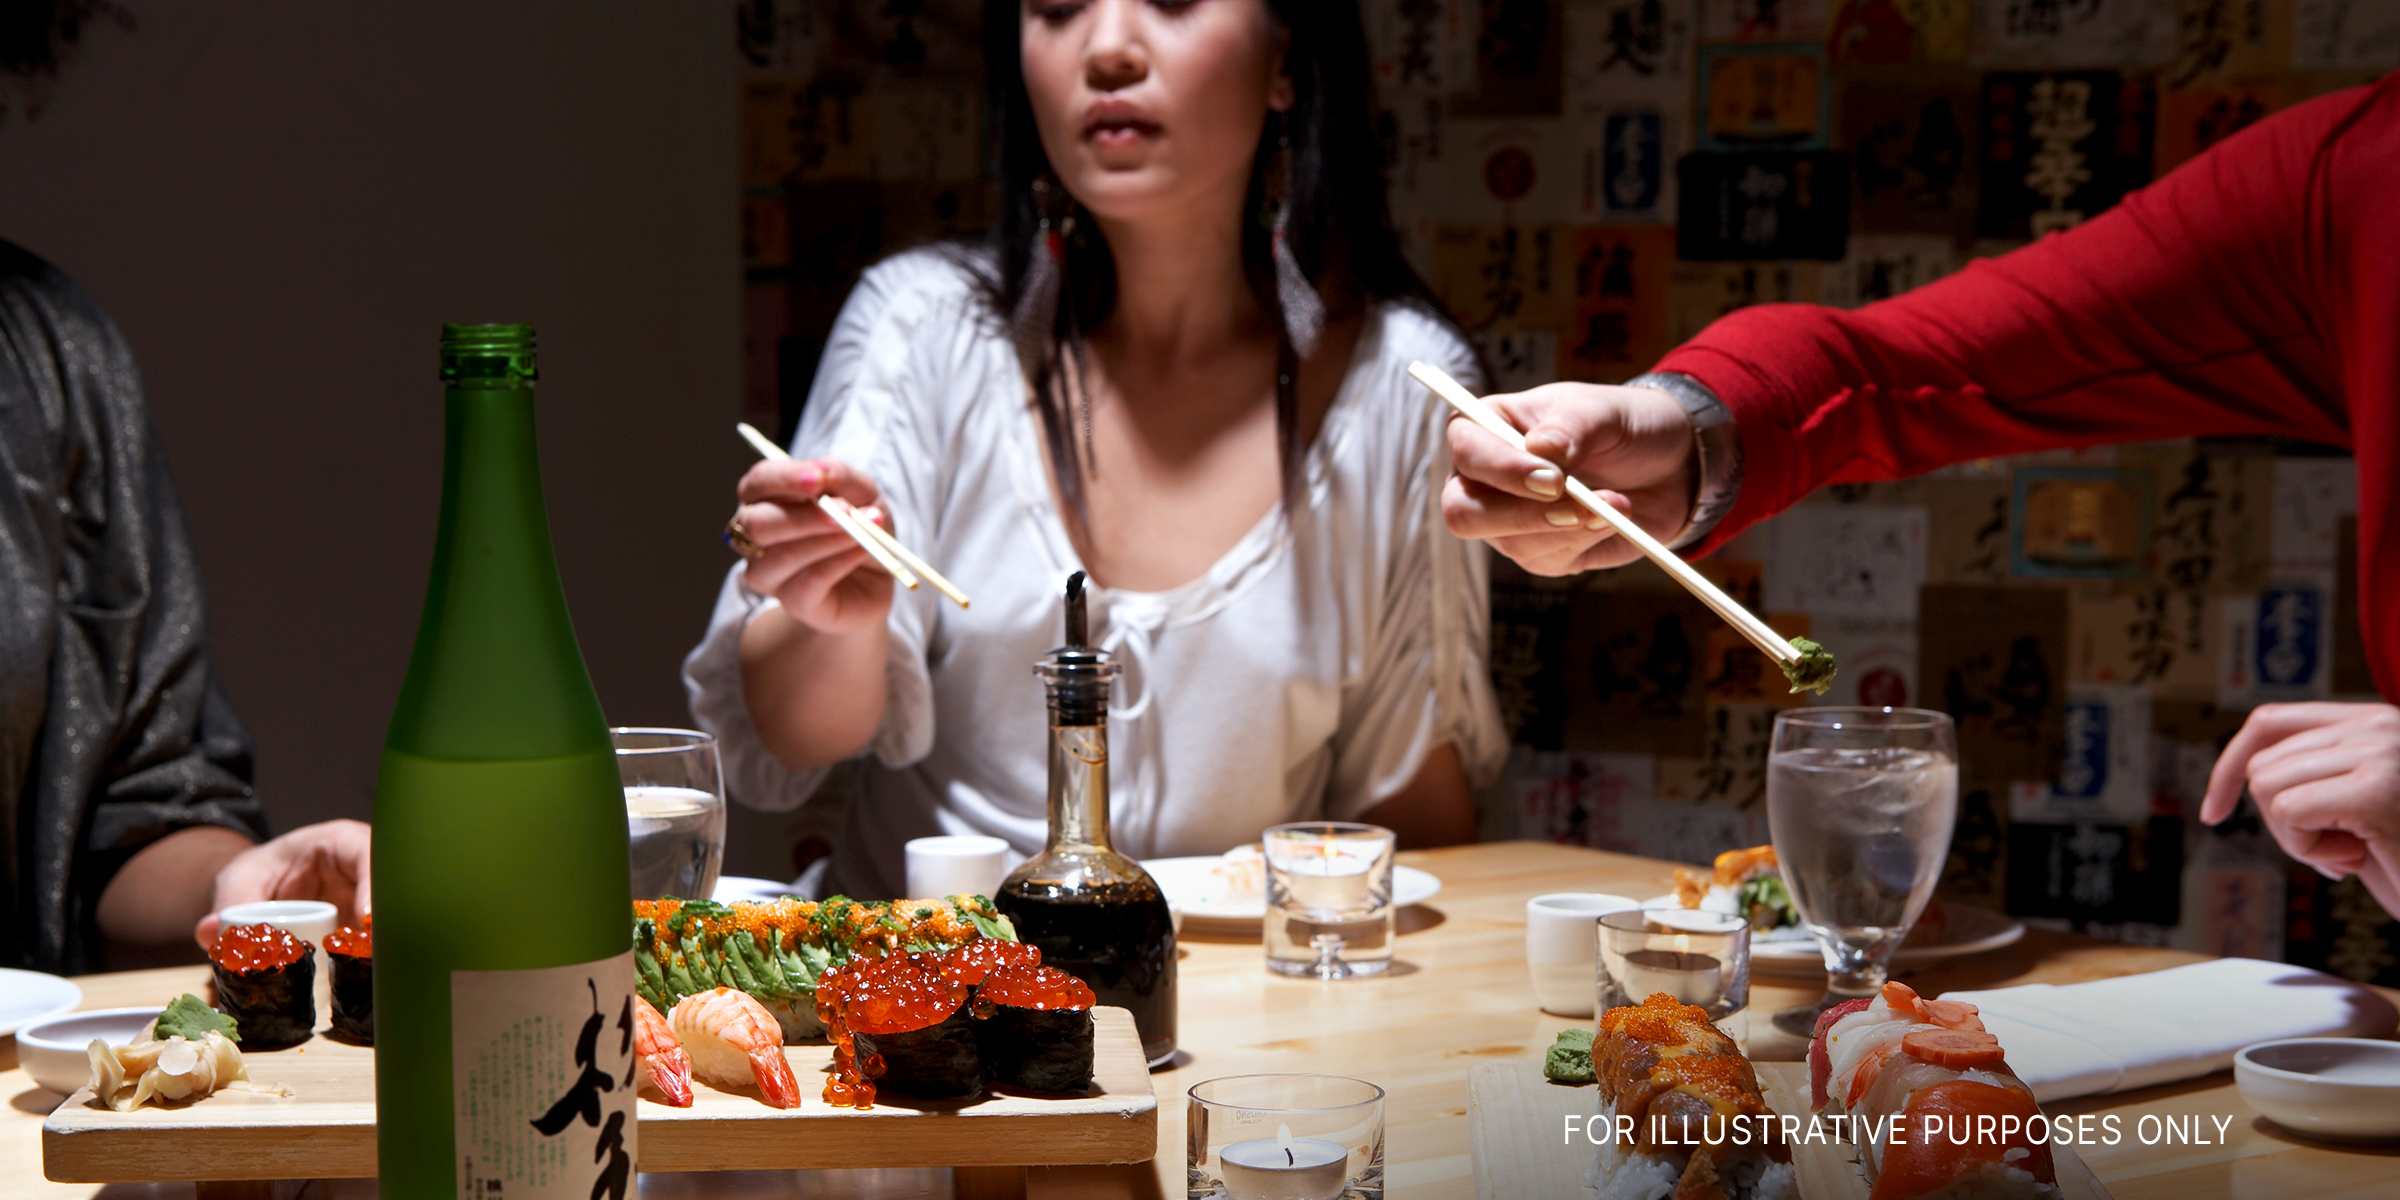 People having sushi at a restaurant | Source: Shutterstock